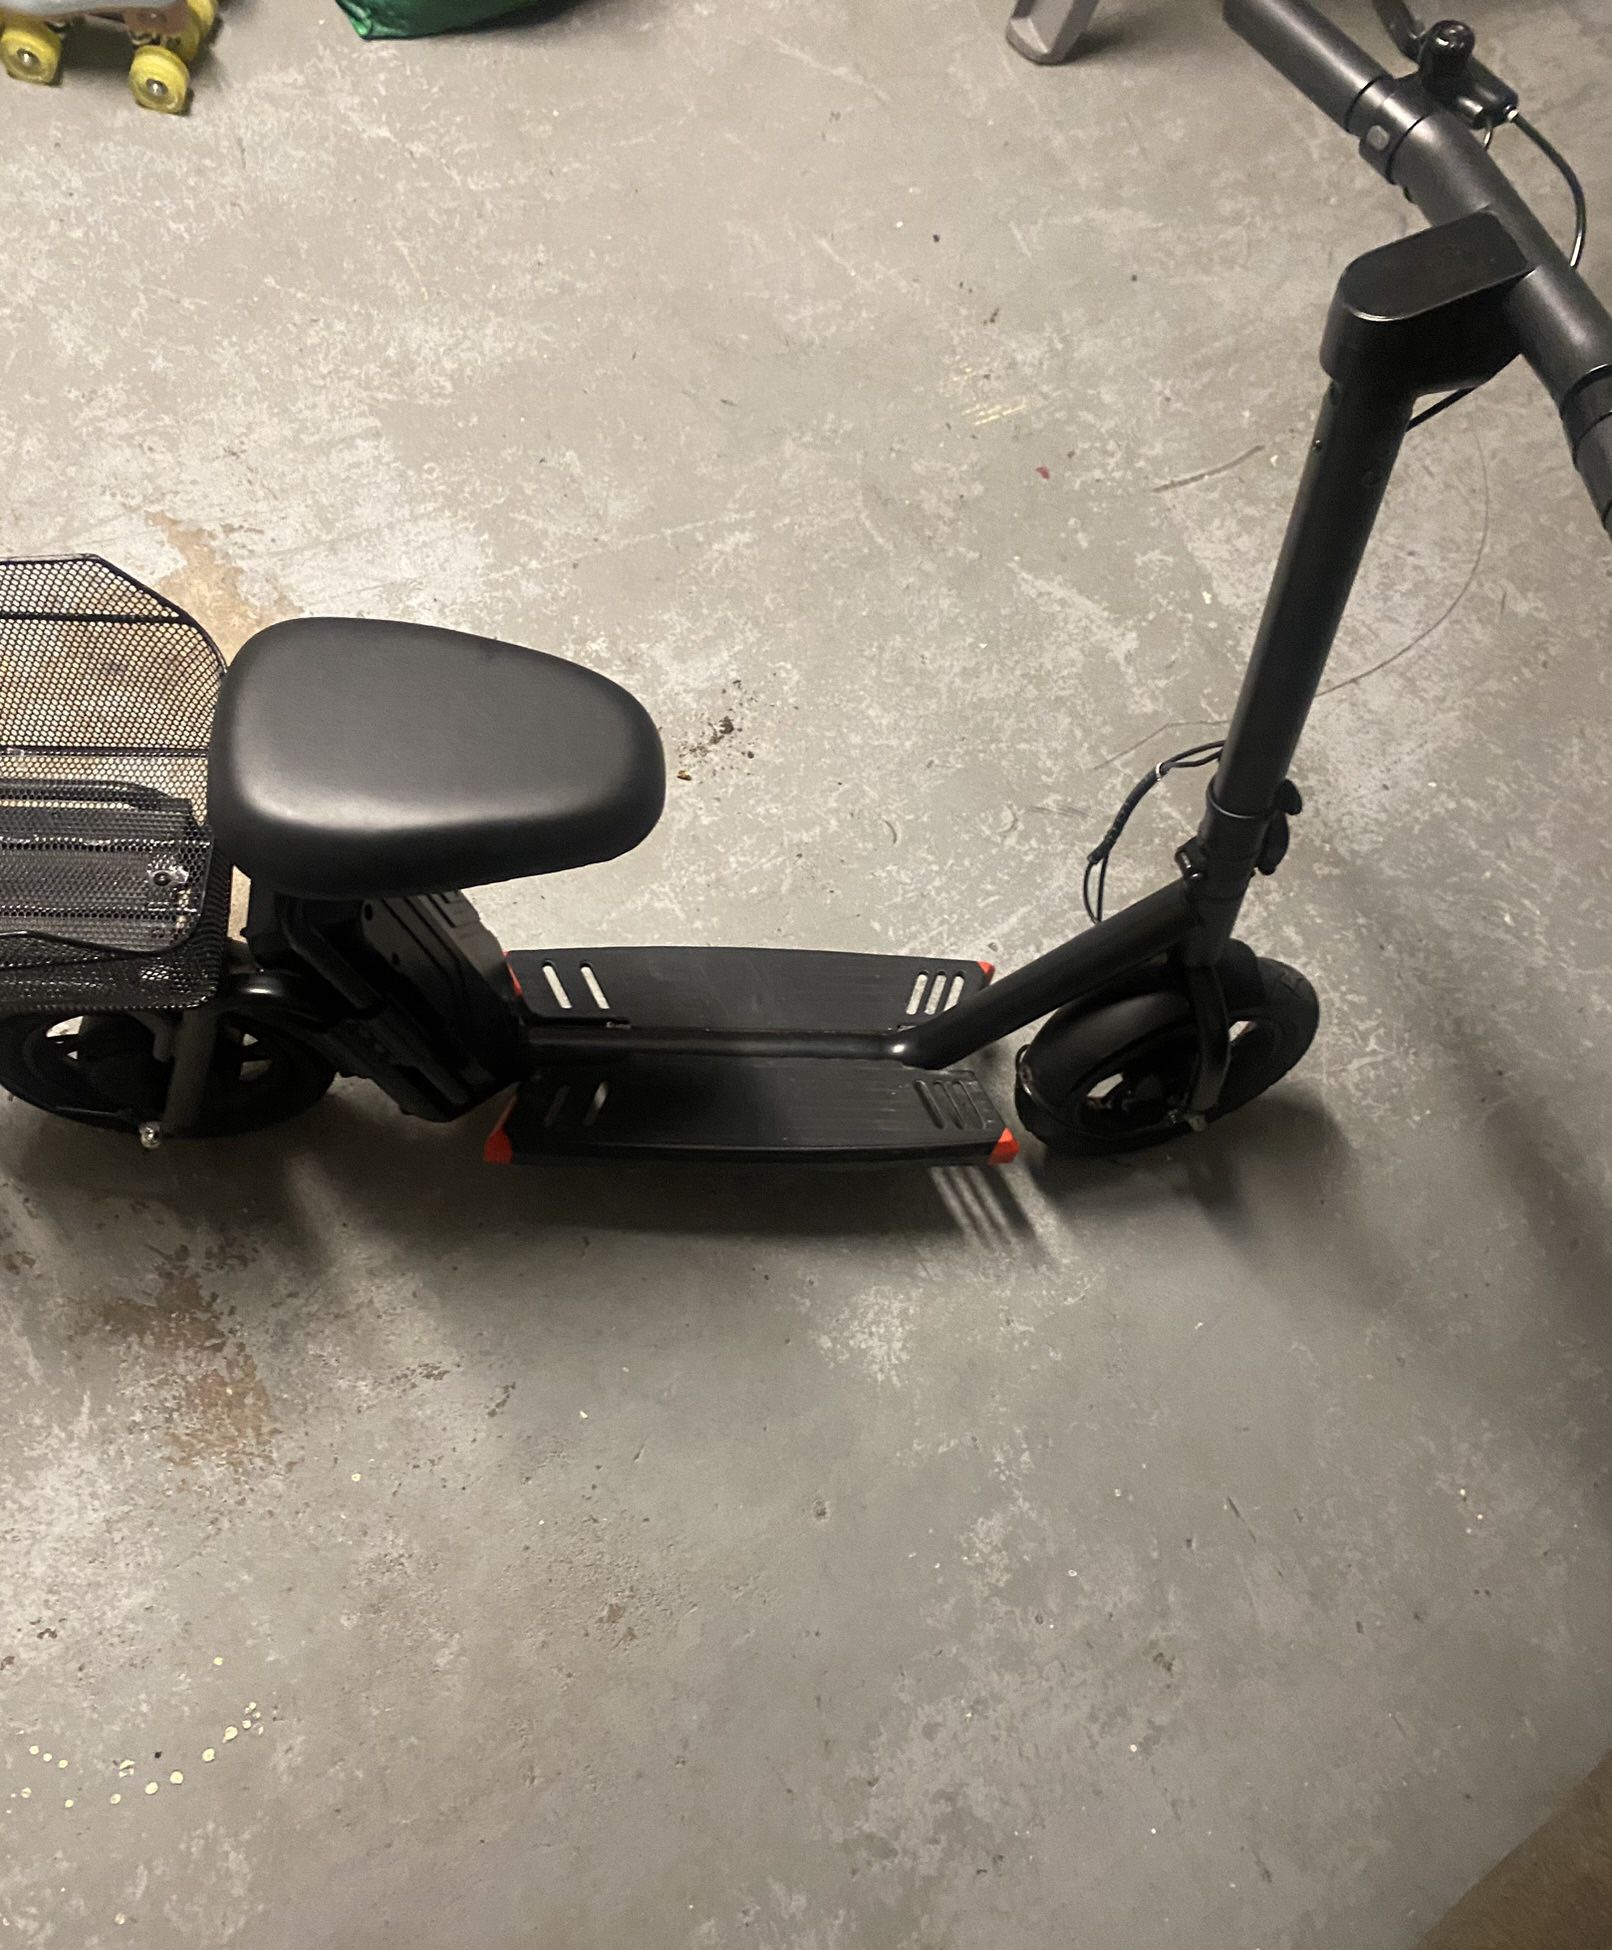 Electric bike for sale